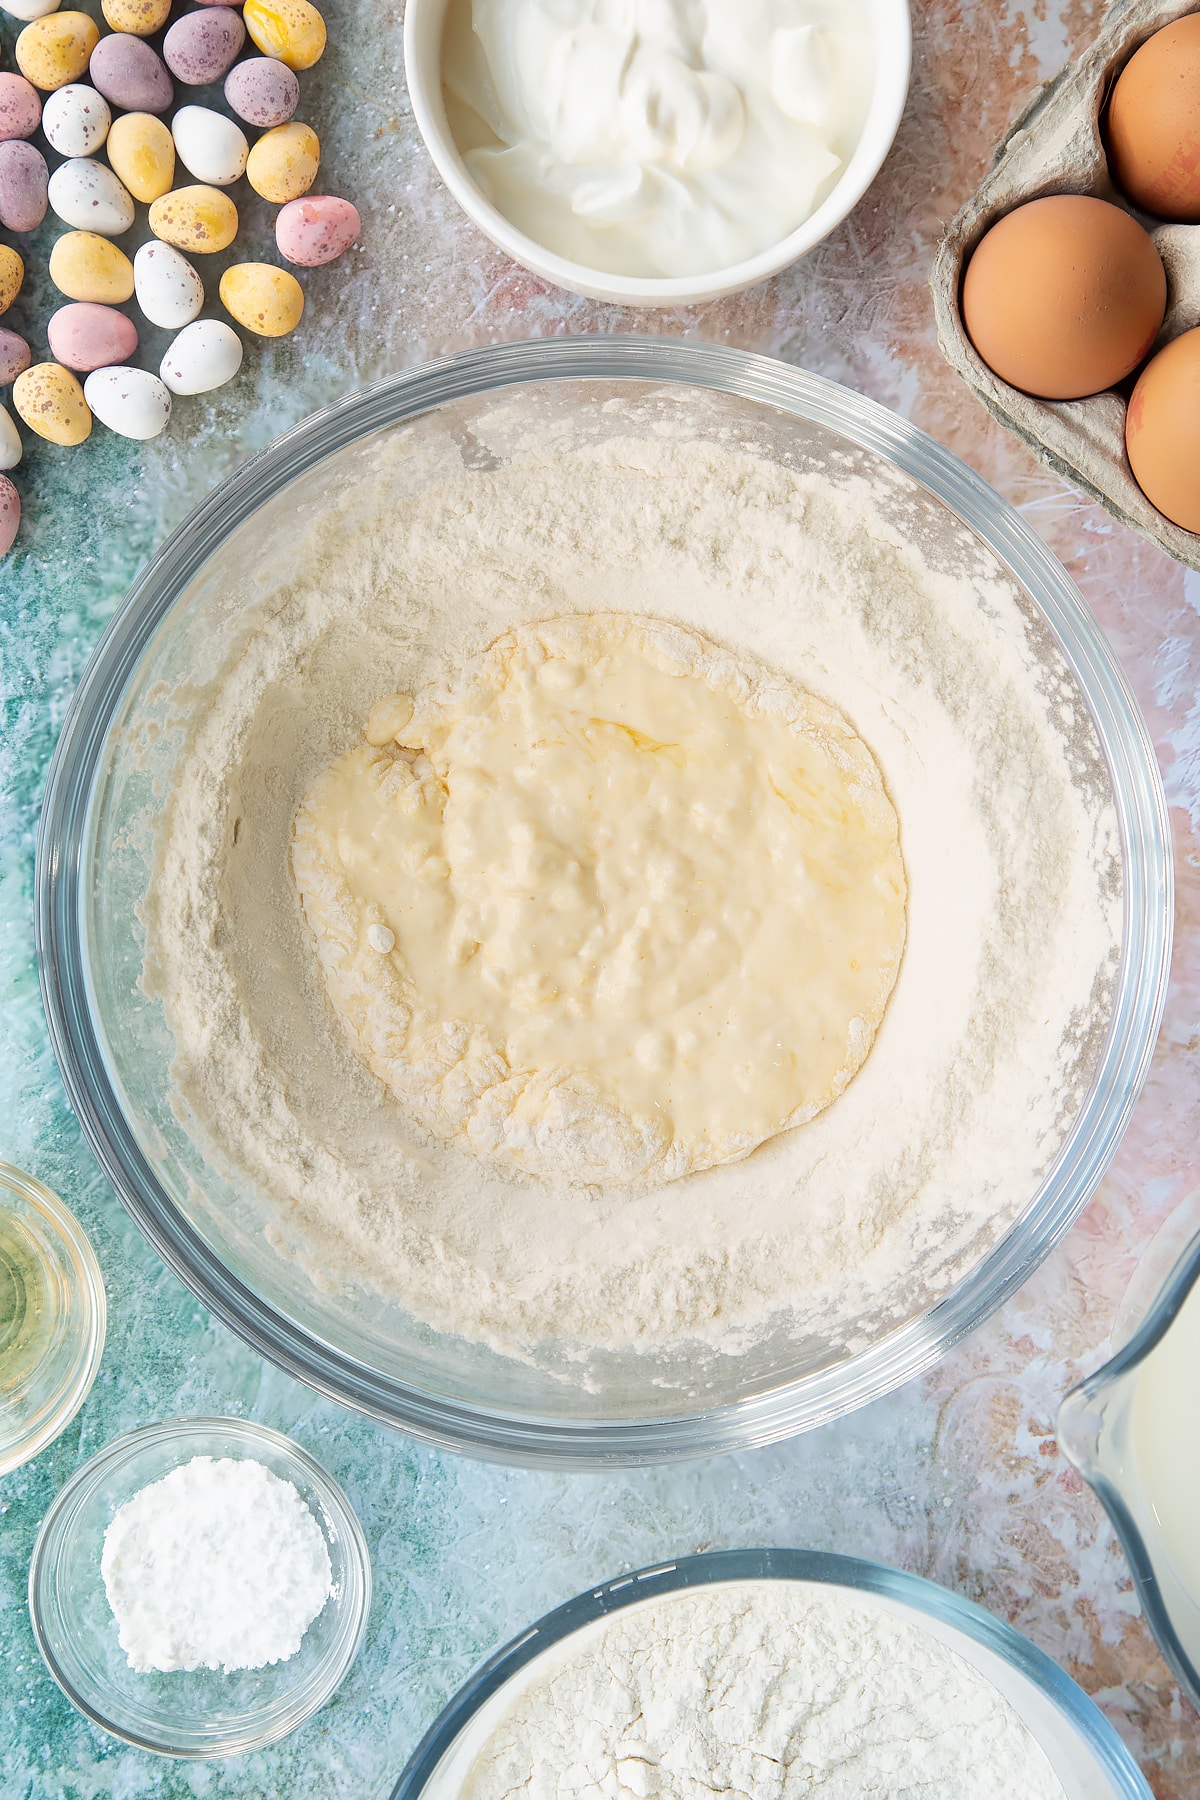 Flour and baking powder in a bowl with a well in the centre filled with whisked creme fraiche and eggs. Ingredients to make Mini Egg pancakes surround the bowl.